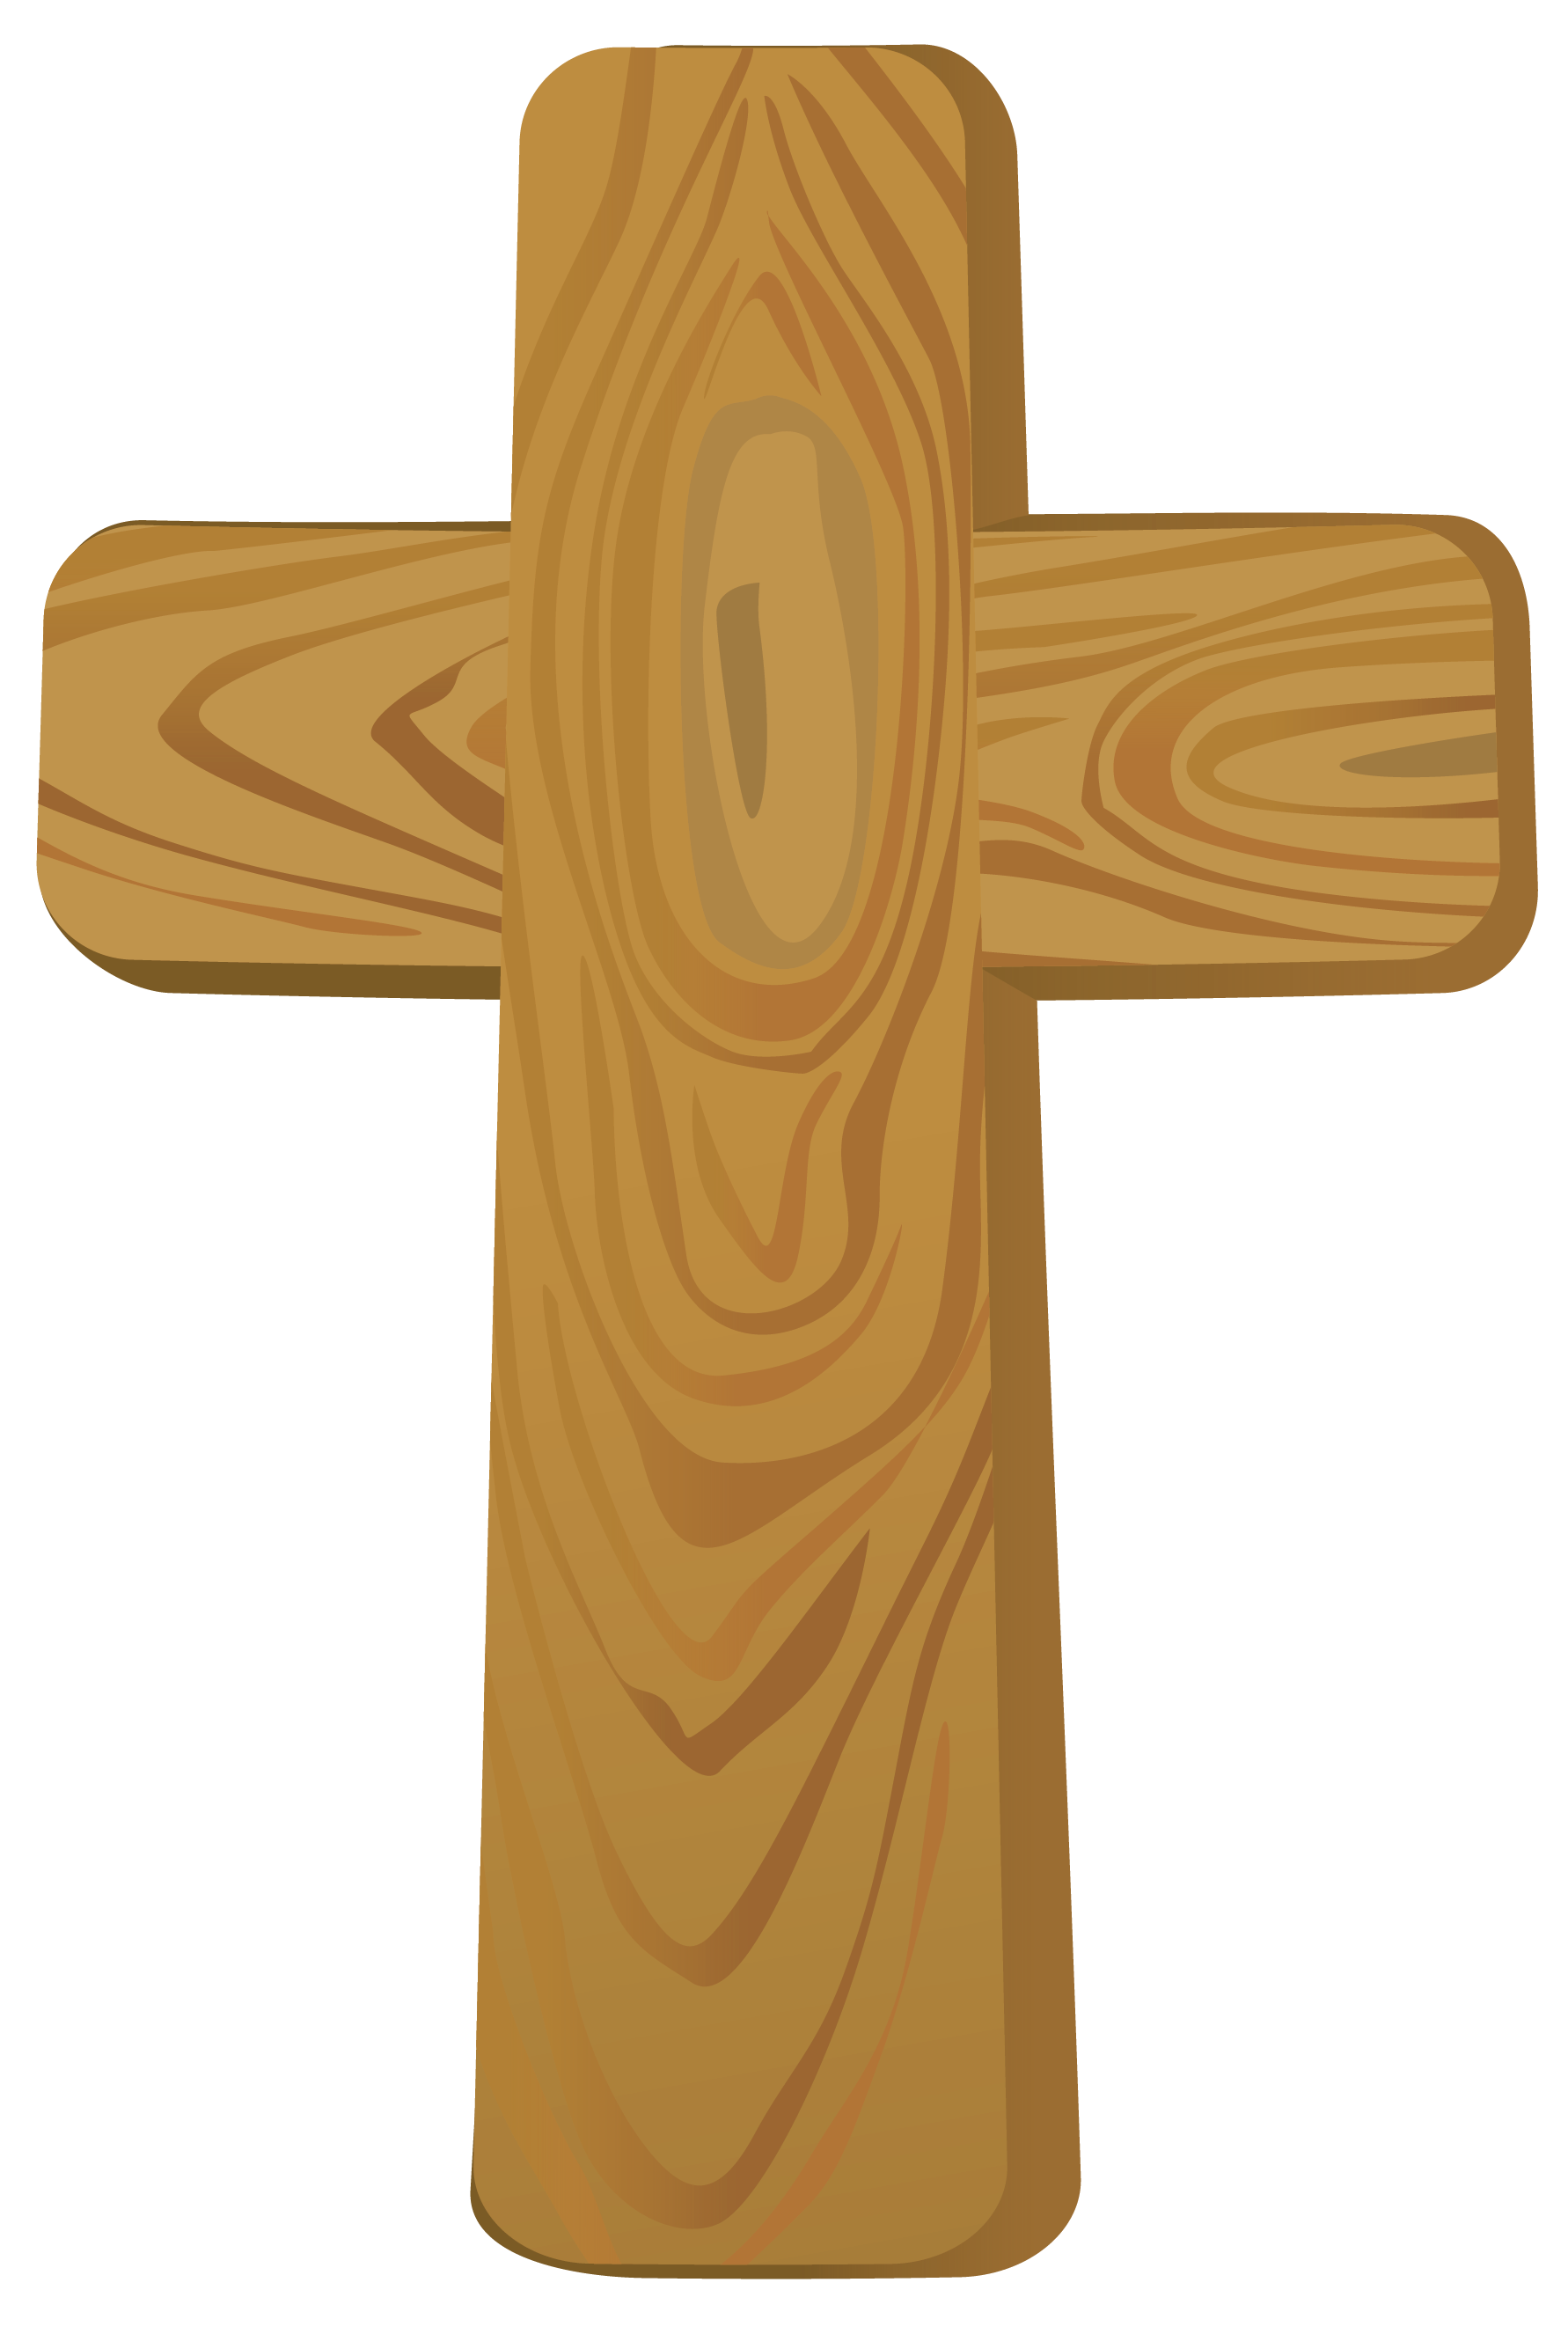 Wooden cross clipart picture